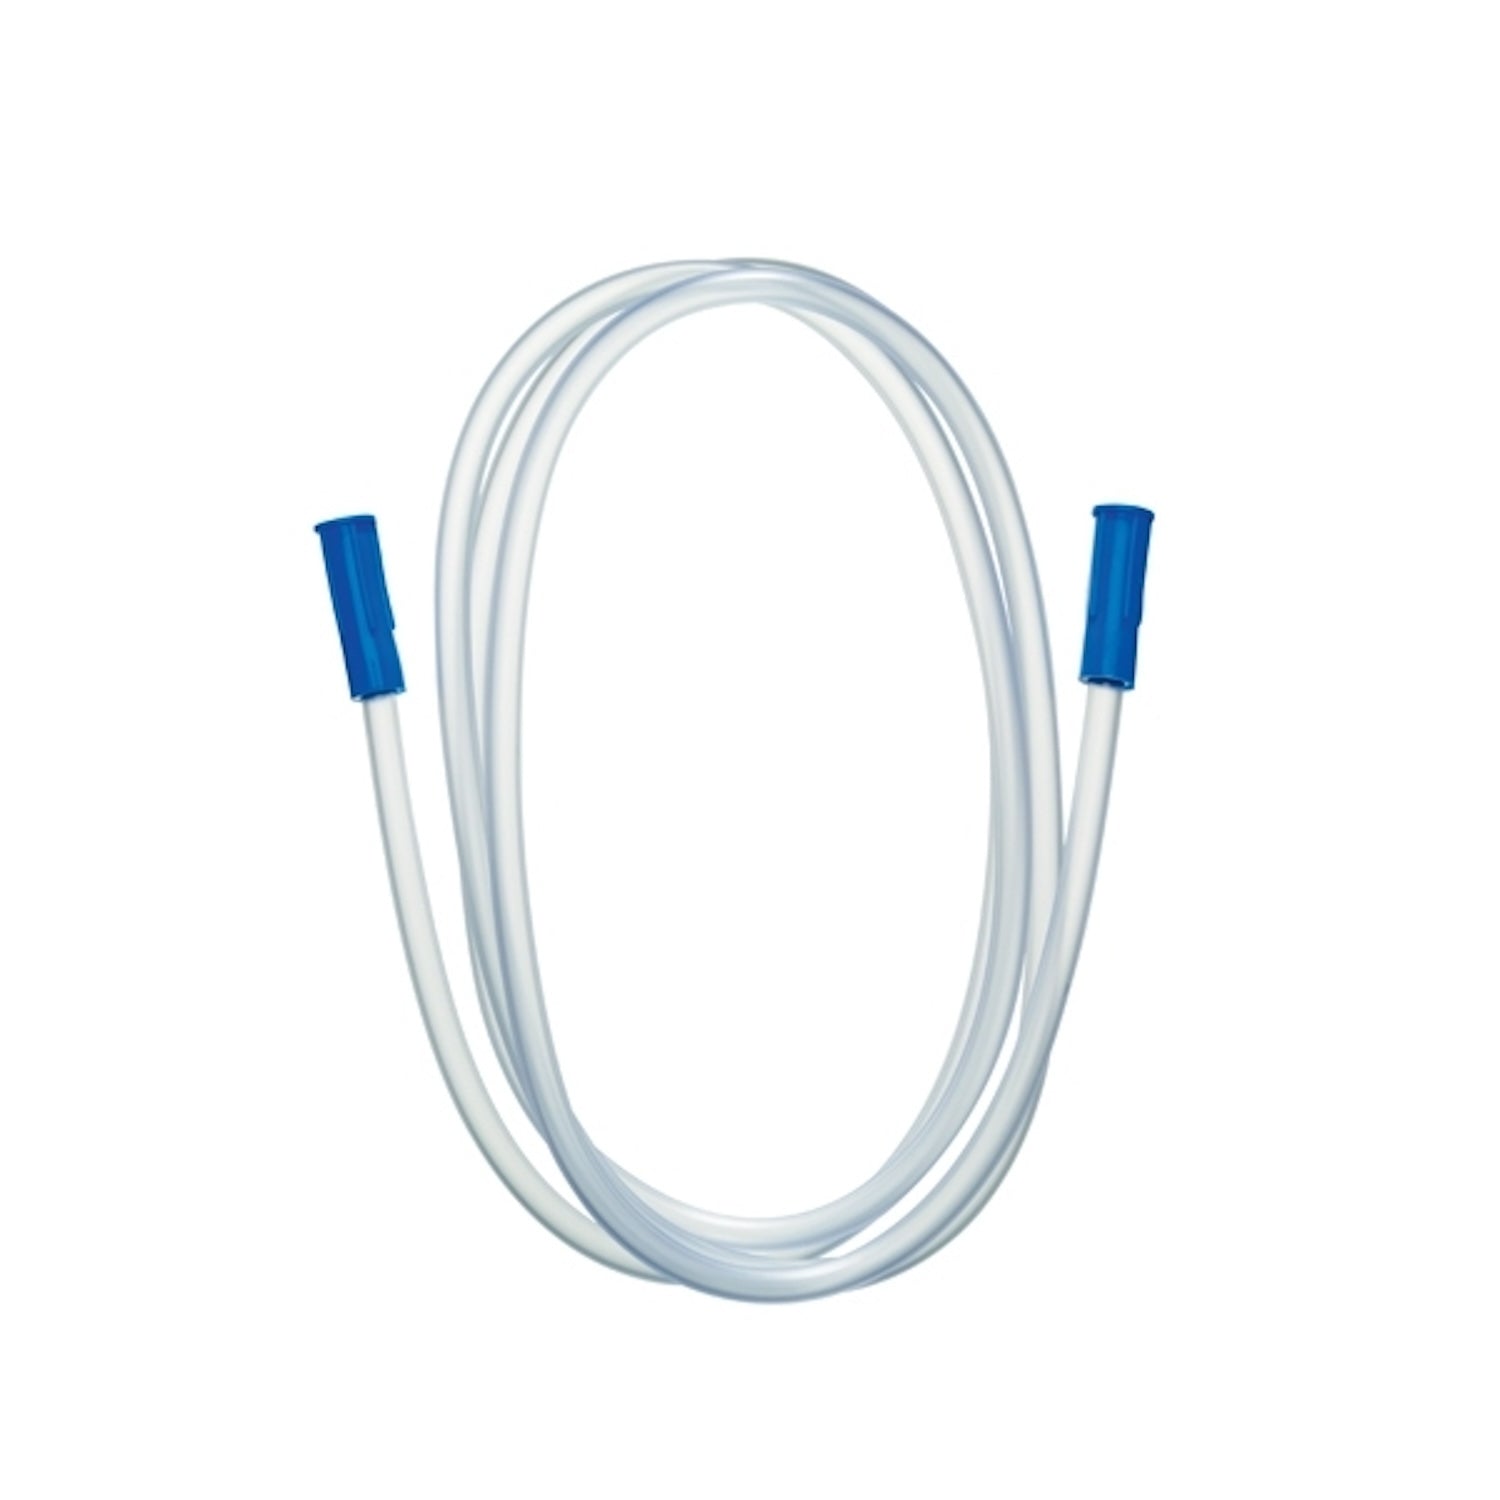 Sterile Suction Connection Tubing | 200cm | 5mm Bore | Pack of 50 (1)